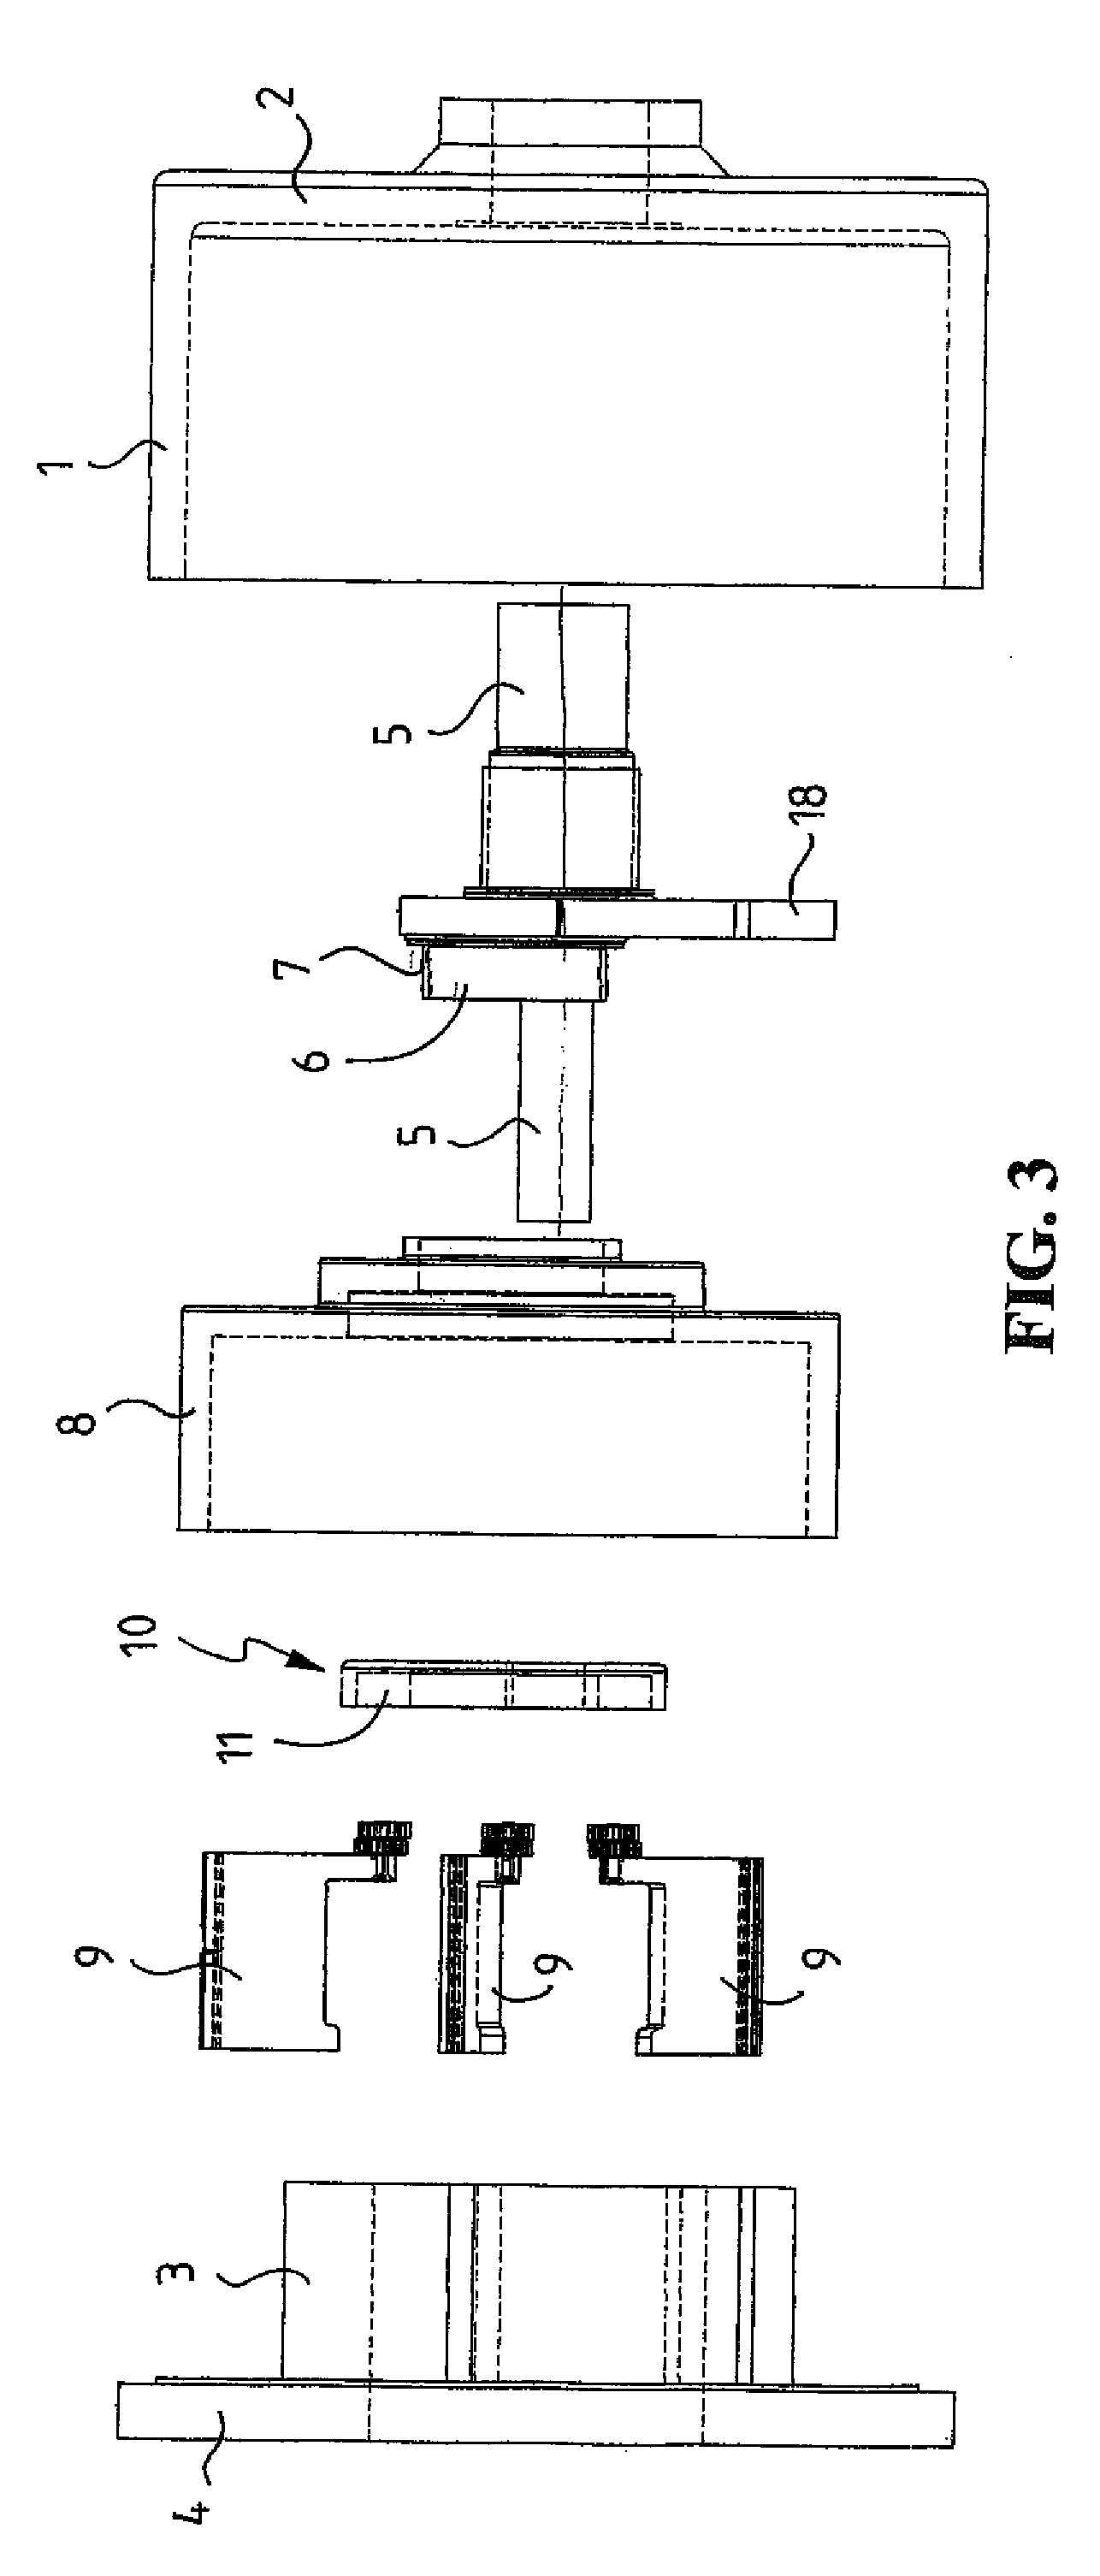 Rotary combustion engine and hydraulic motor